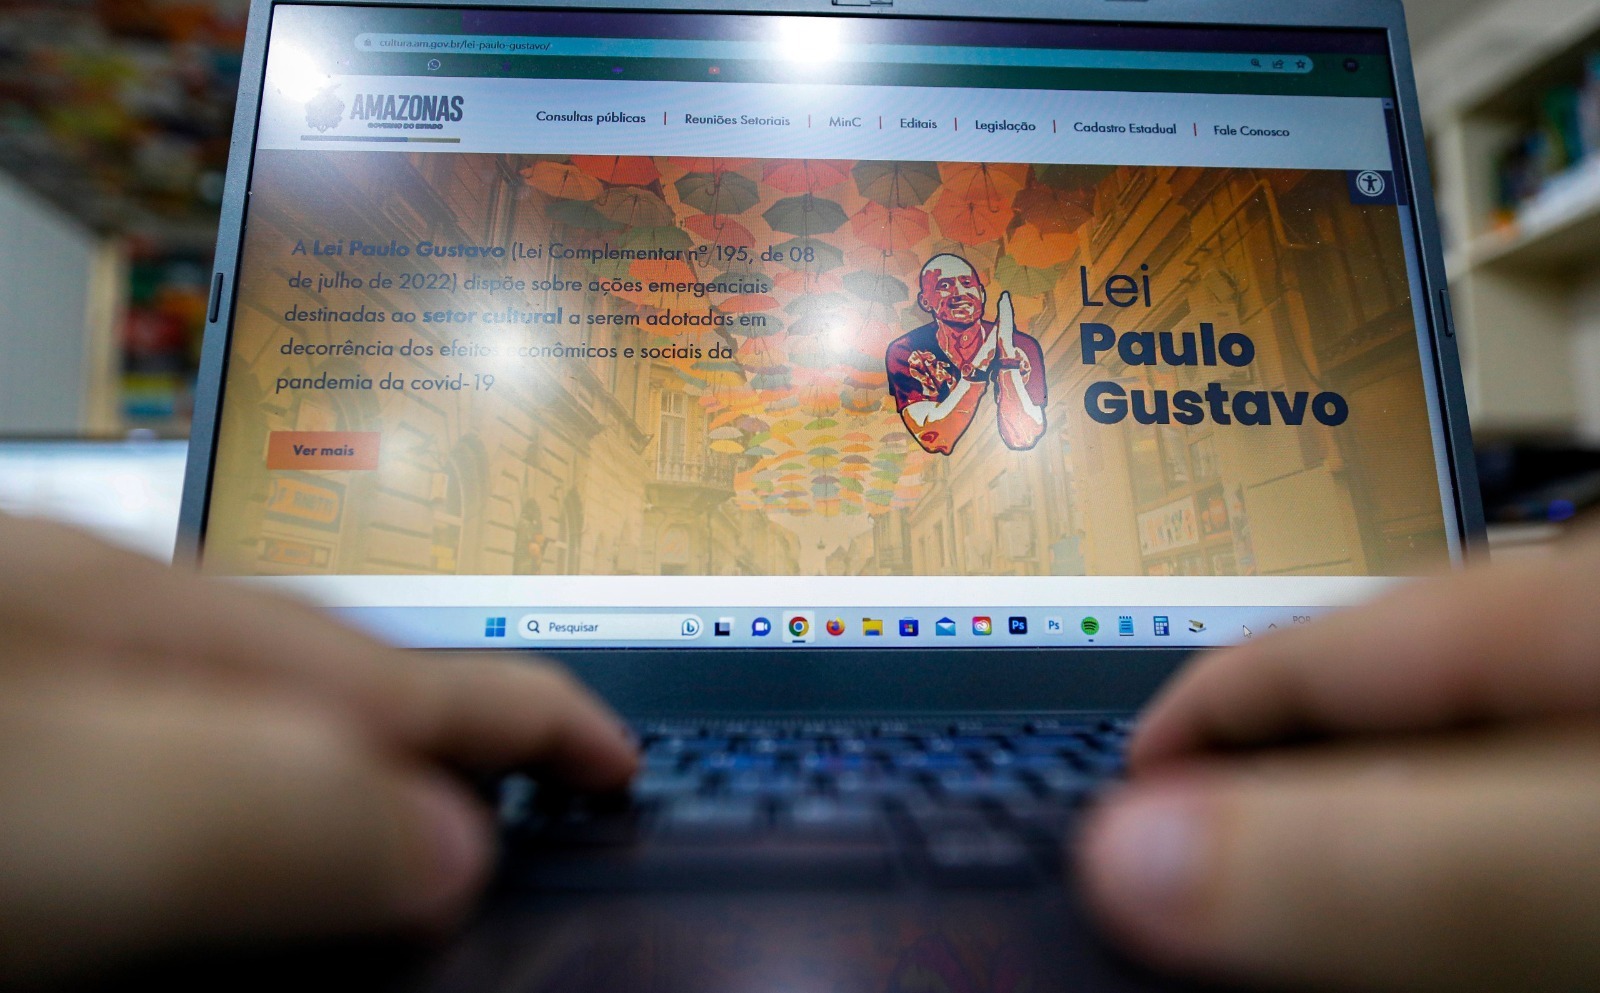 Check out which audiovisual projects were included in the Paulo Gustavo Law